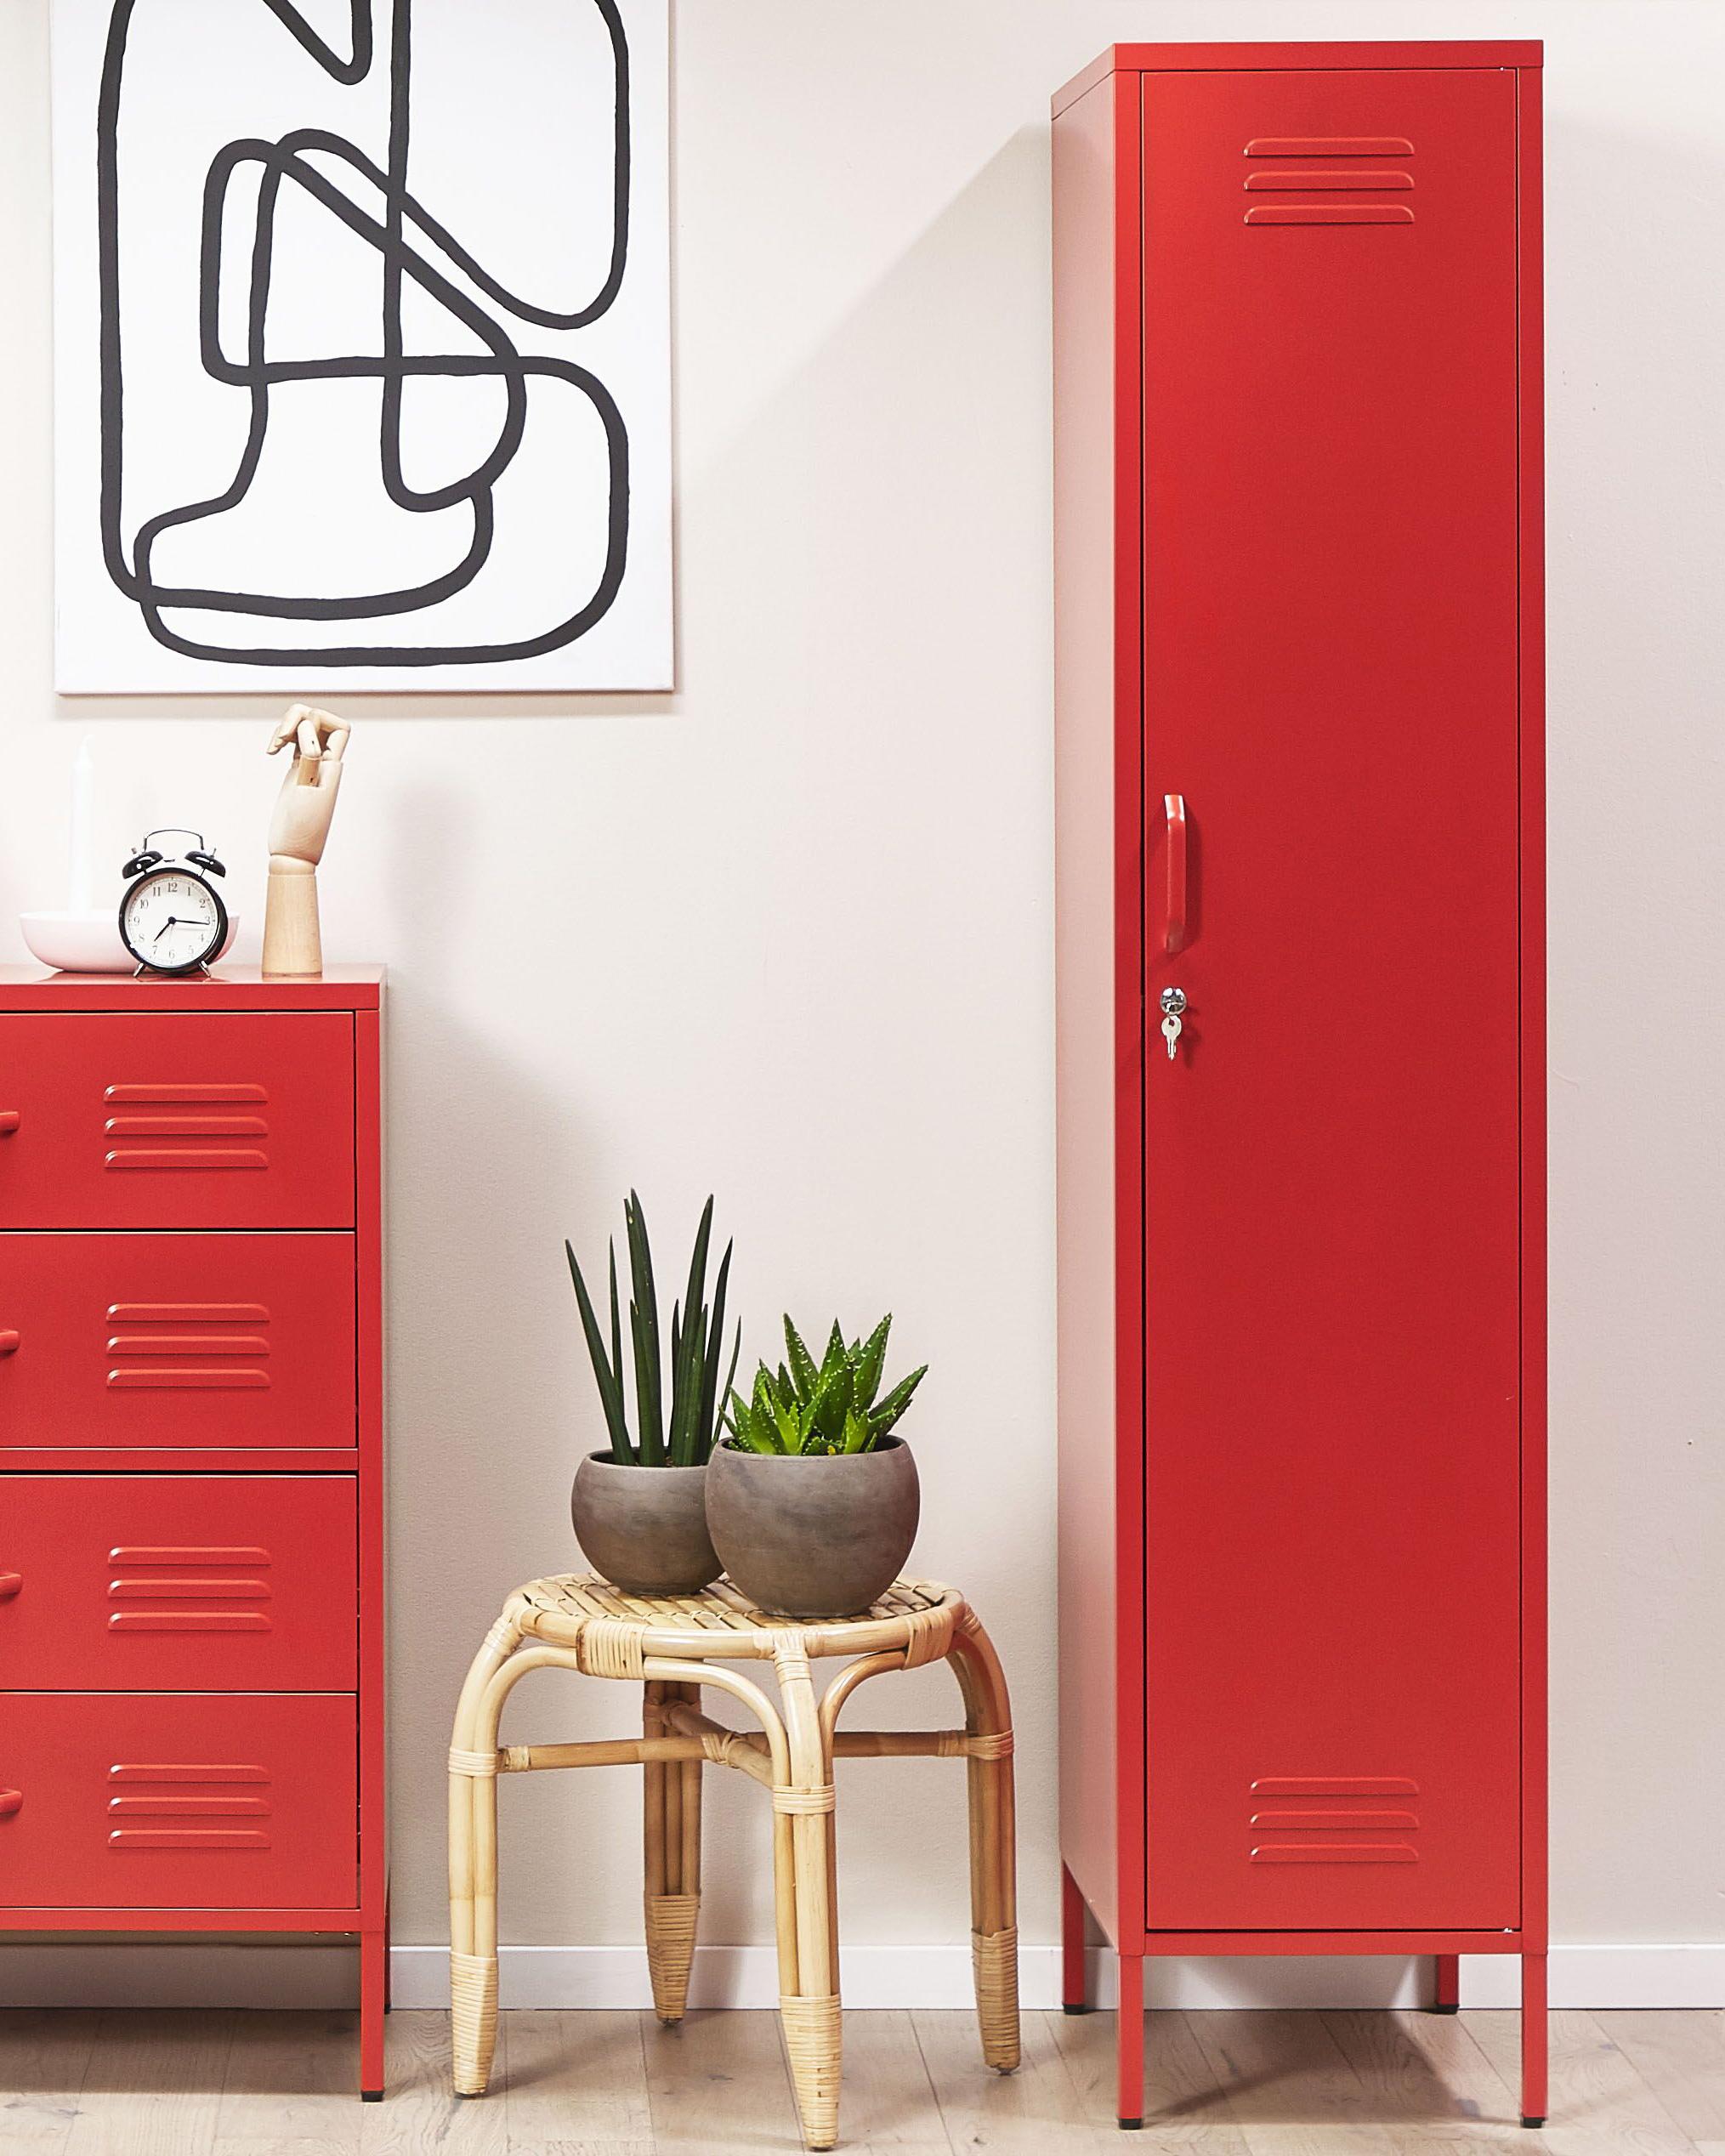 Metal Storage Cabinet Red FROME